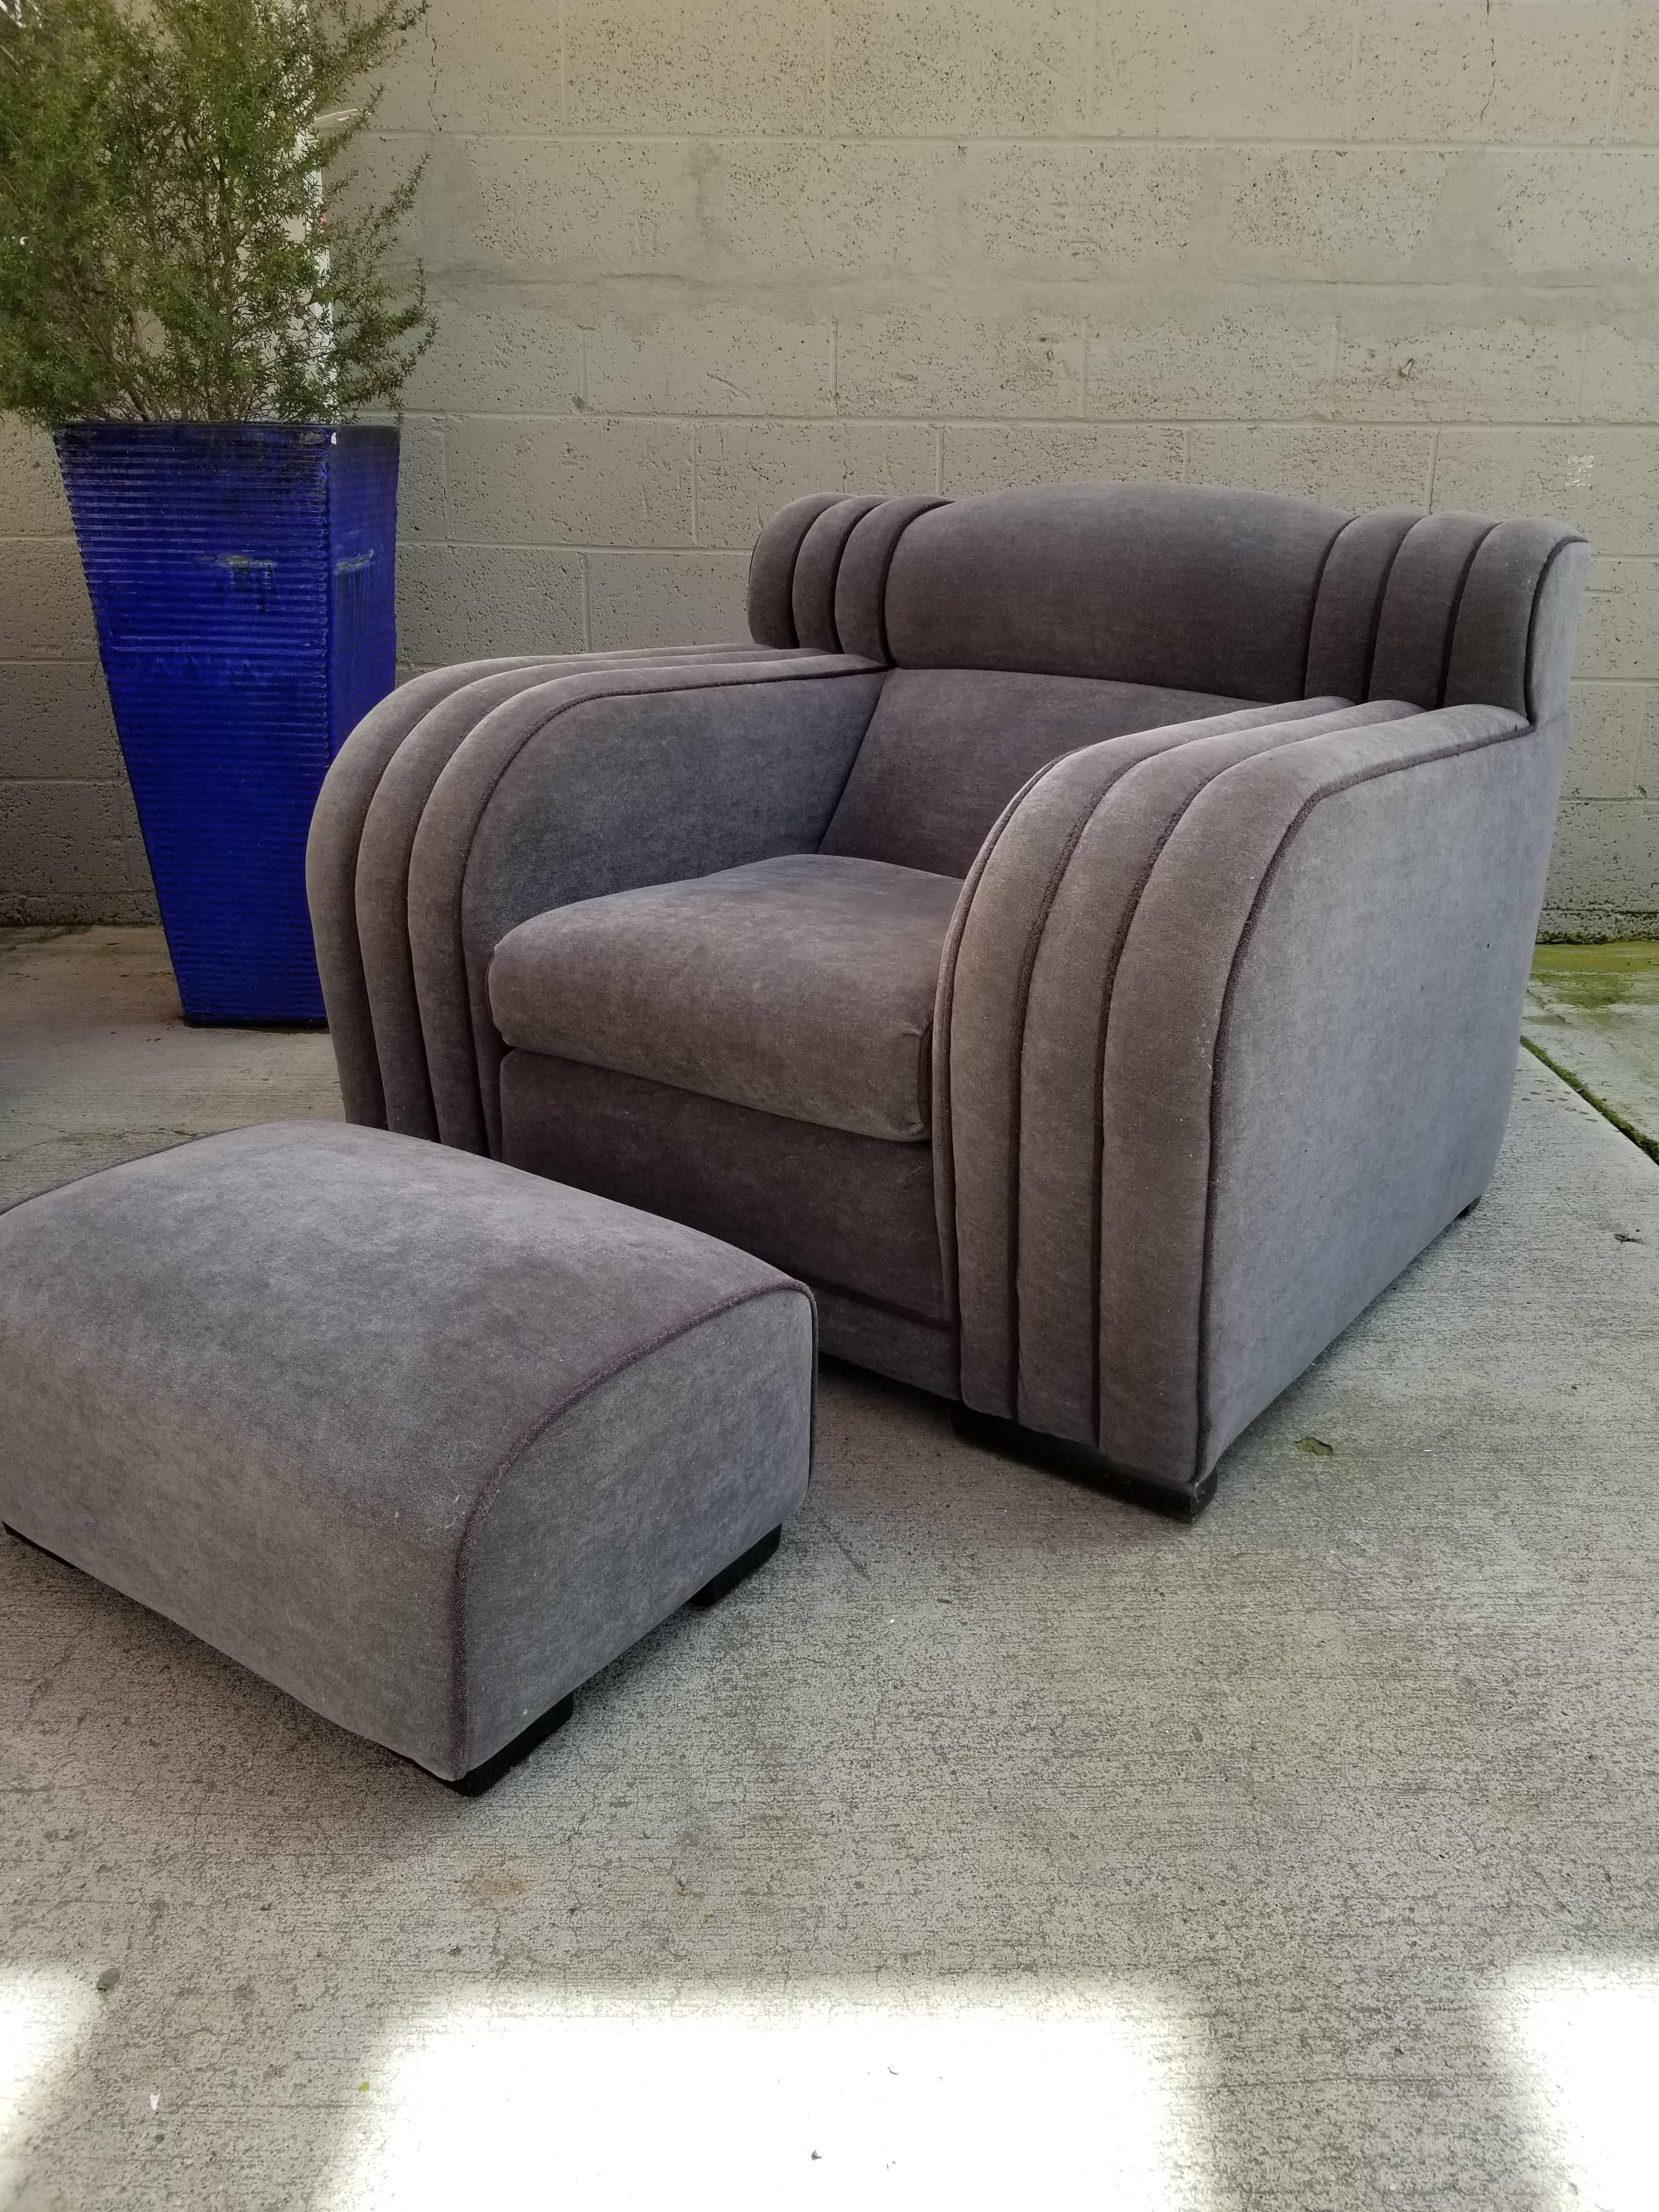 Exquisite four-piece set consisting of a sofa, lounge chair and two footstools. A fine example of the French Art Deco period, circa 1920s. Upholstered in mohair. Club chair measures 39.75